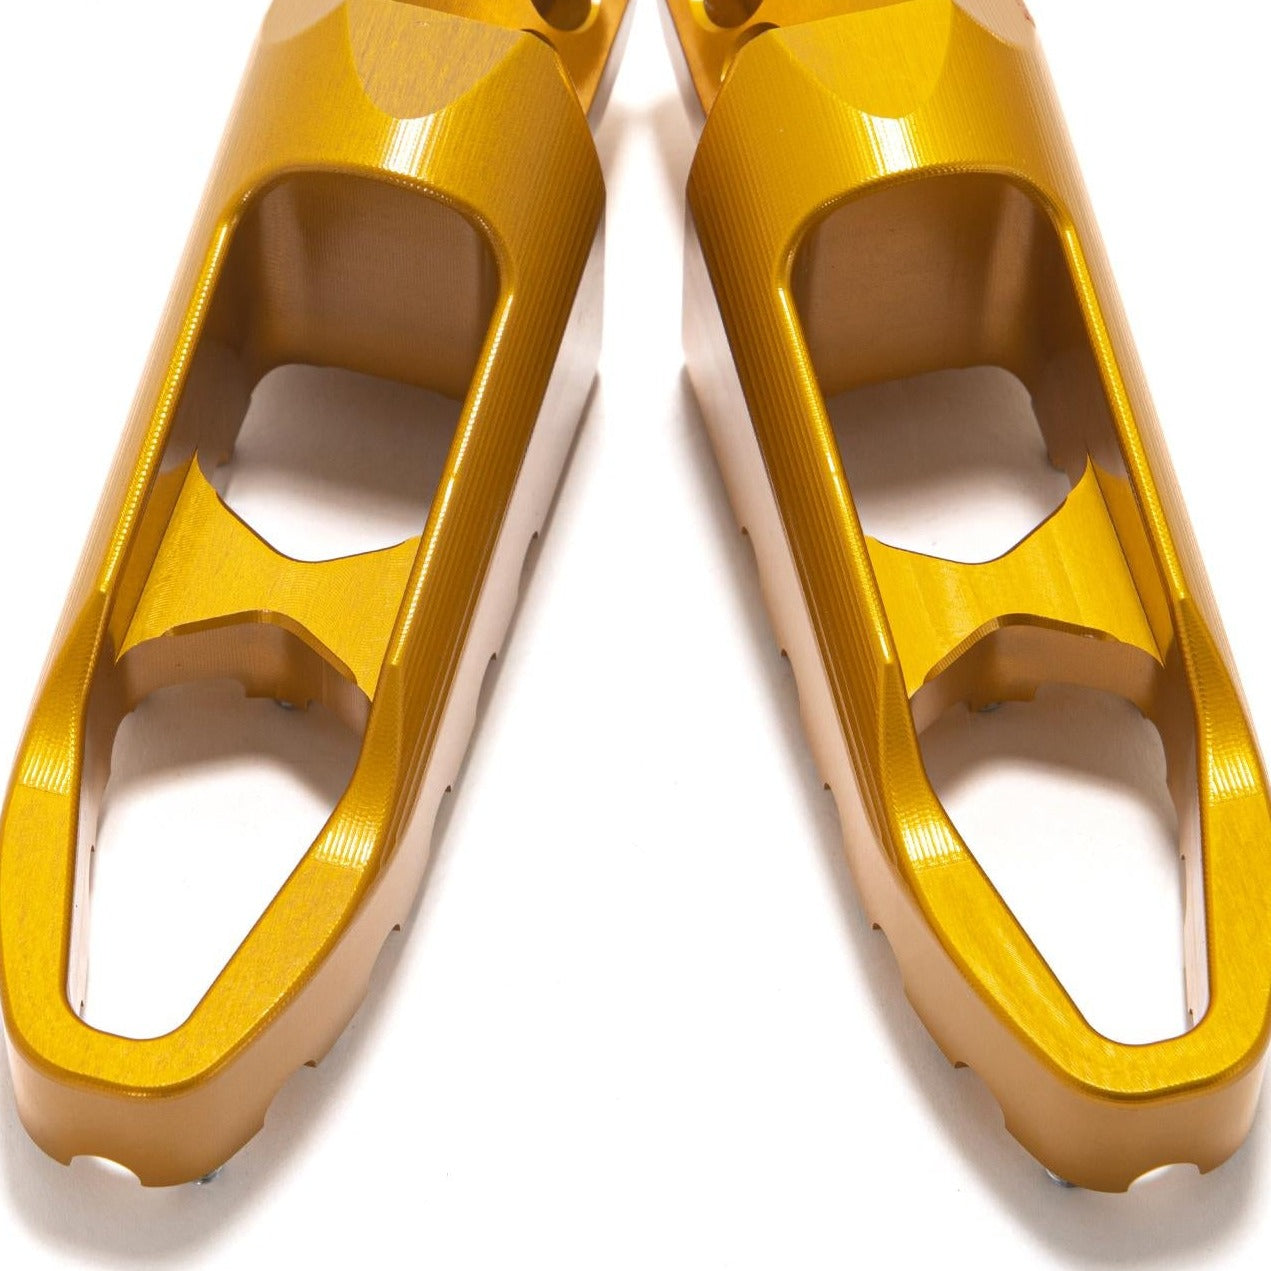 Ultra Bee Wider Foot Pegs